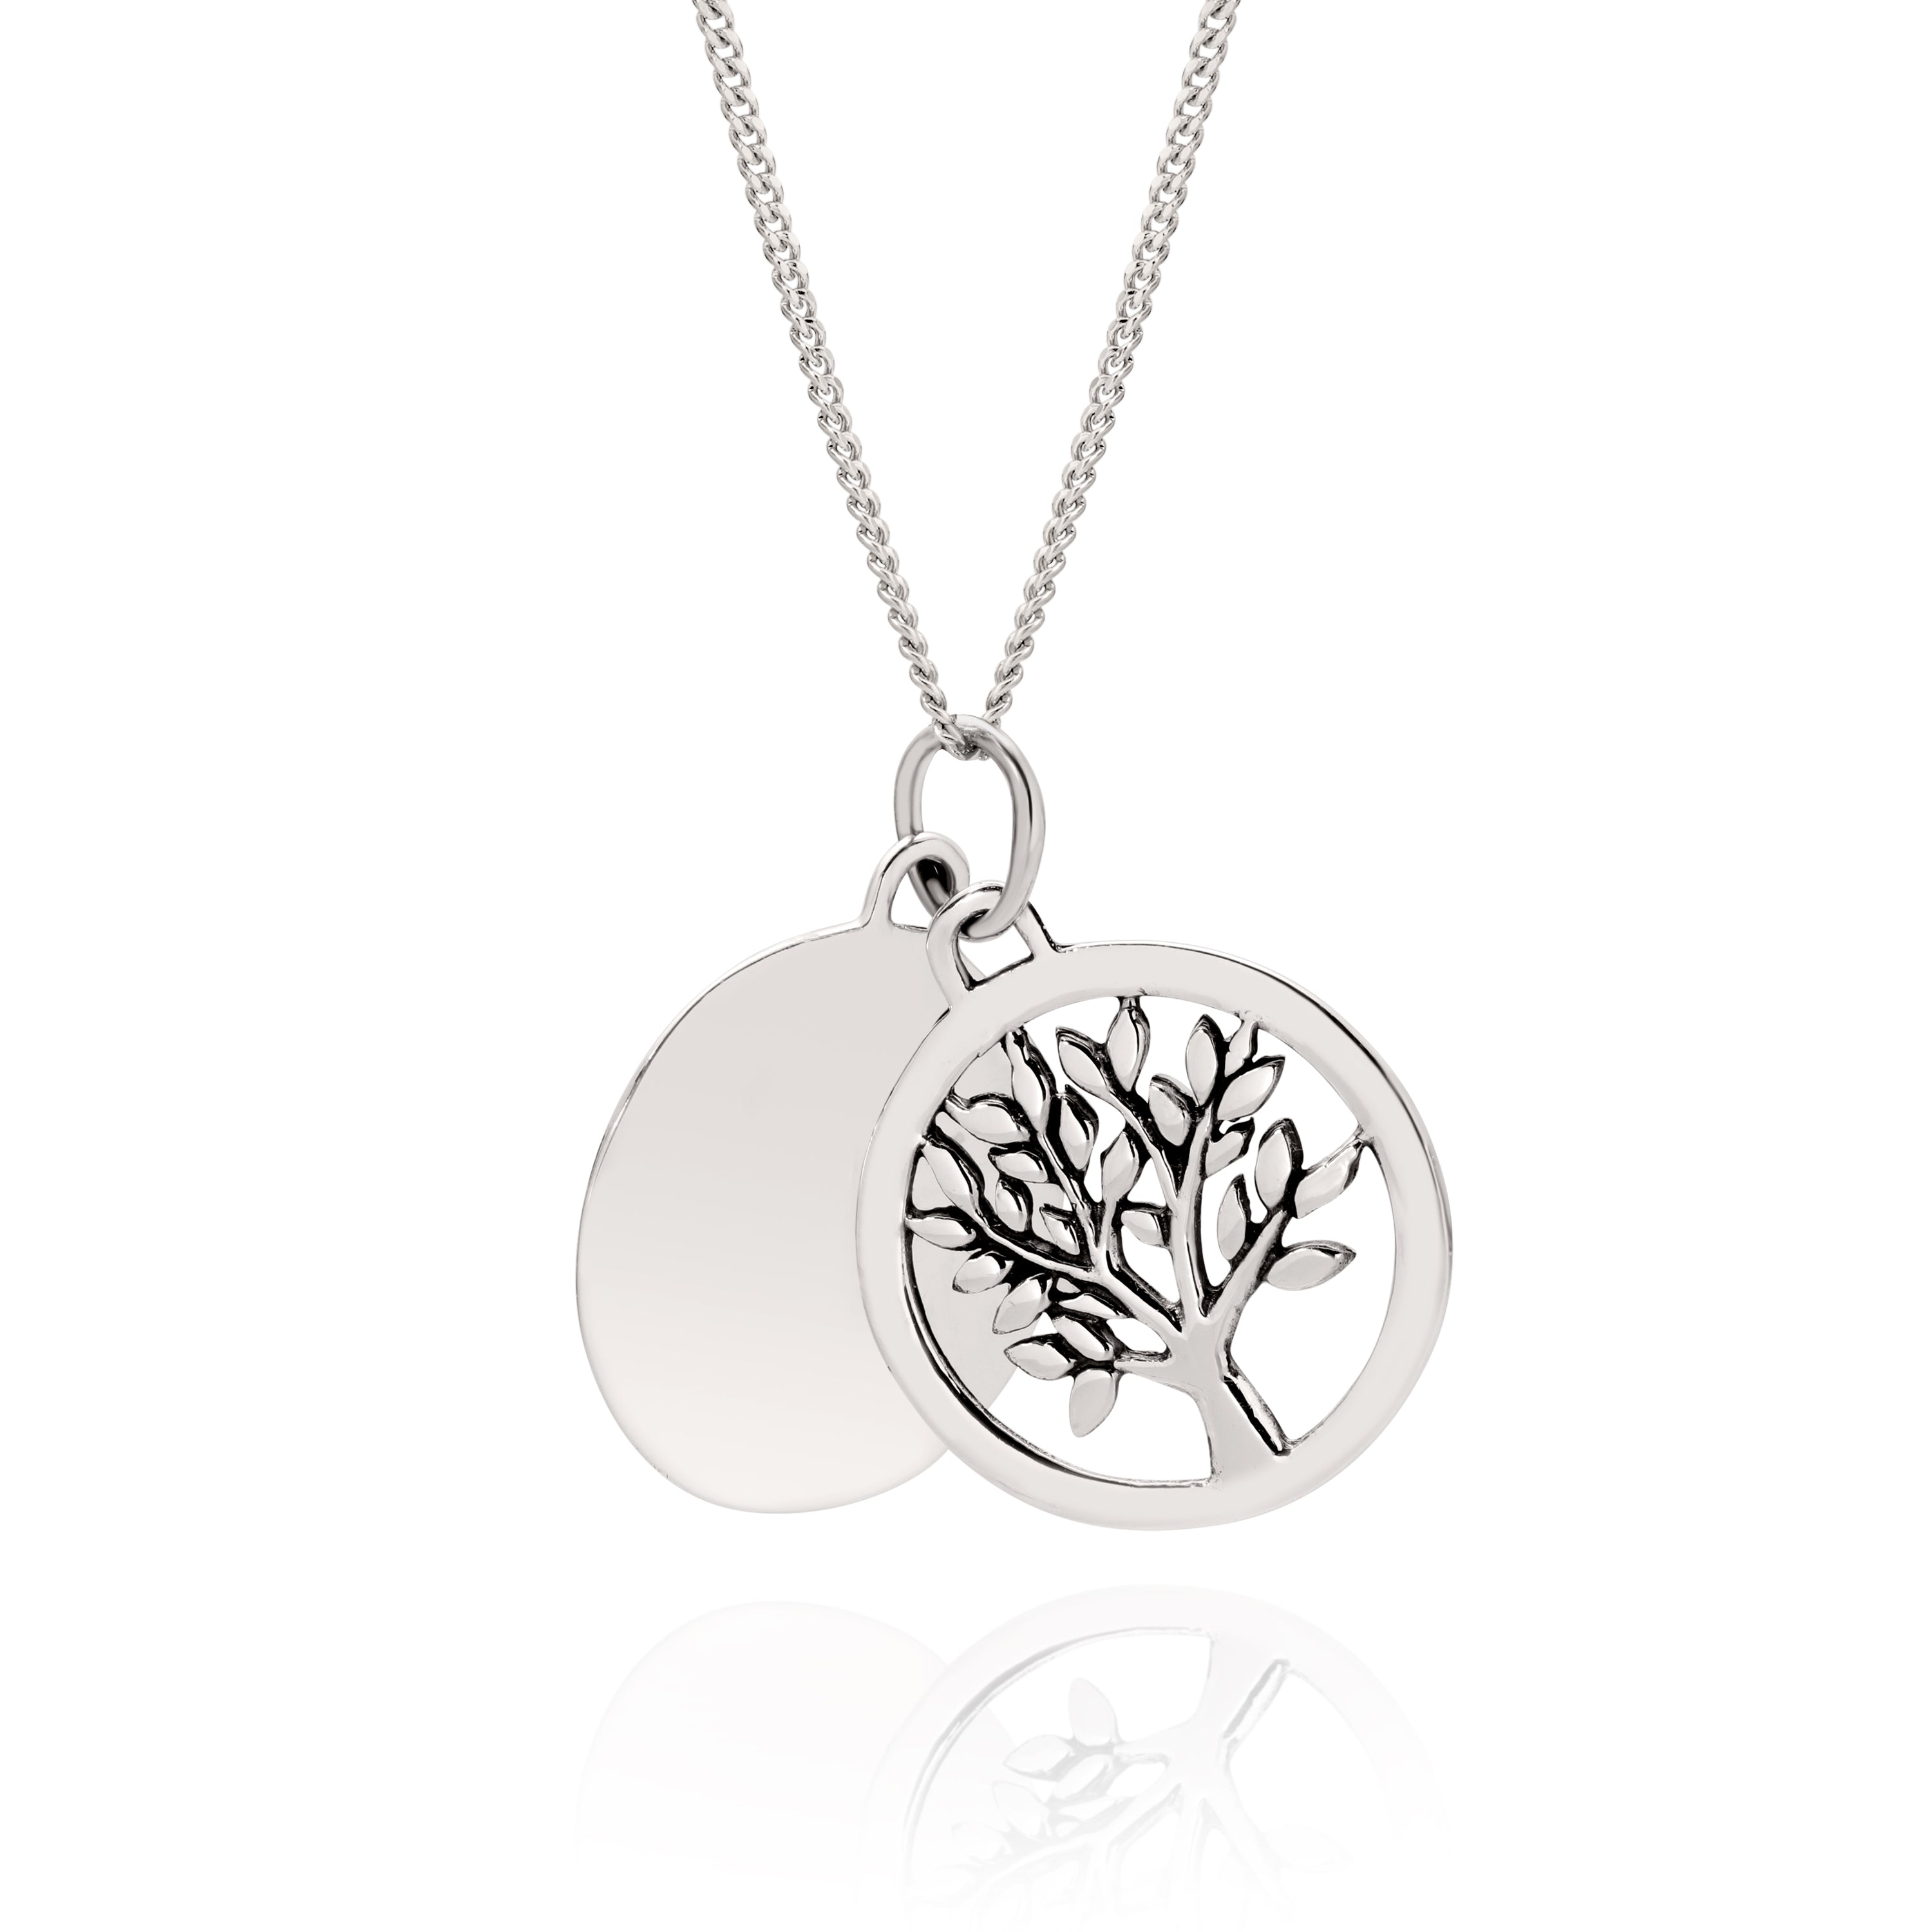 Silver 'A family's love is forever' meSterling silverage pendant